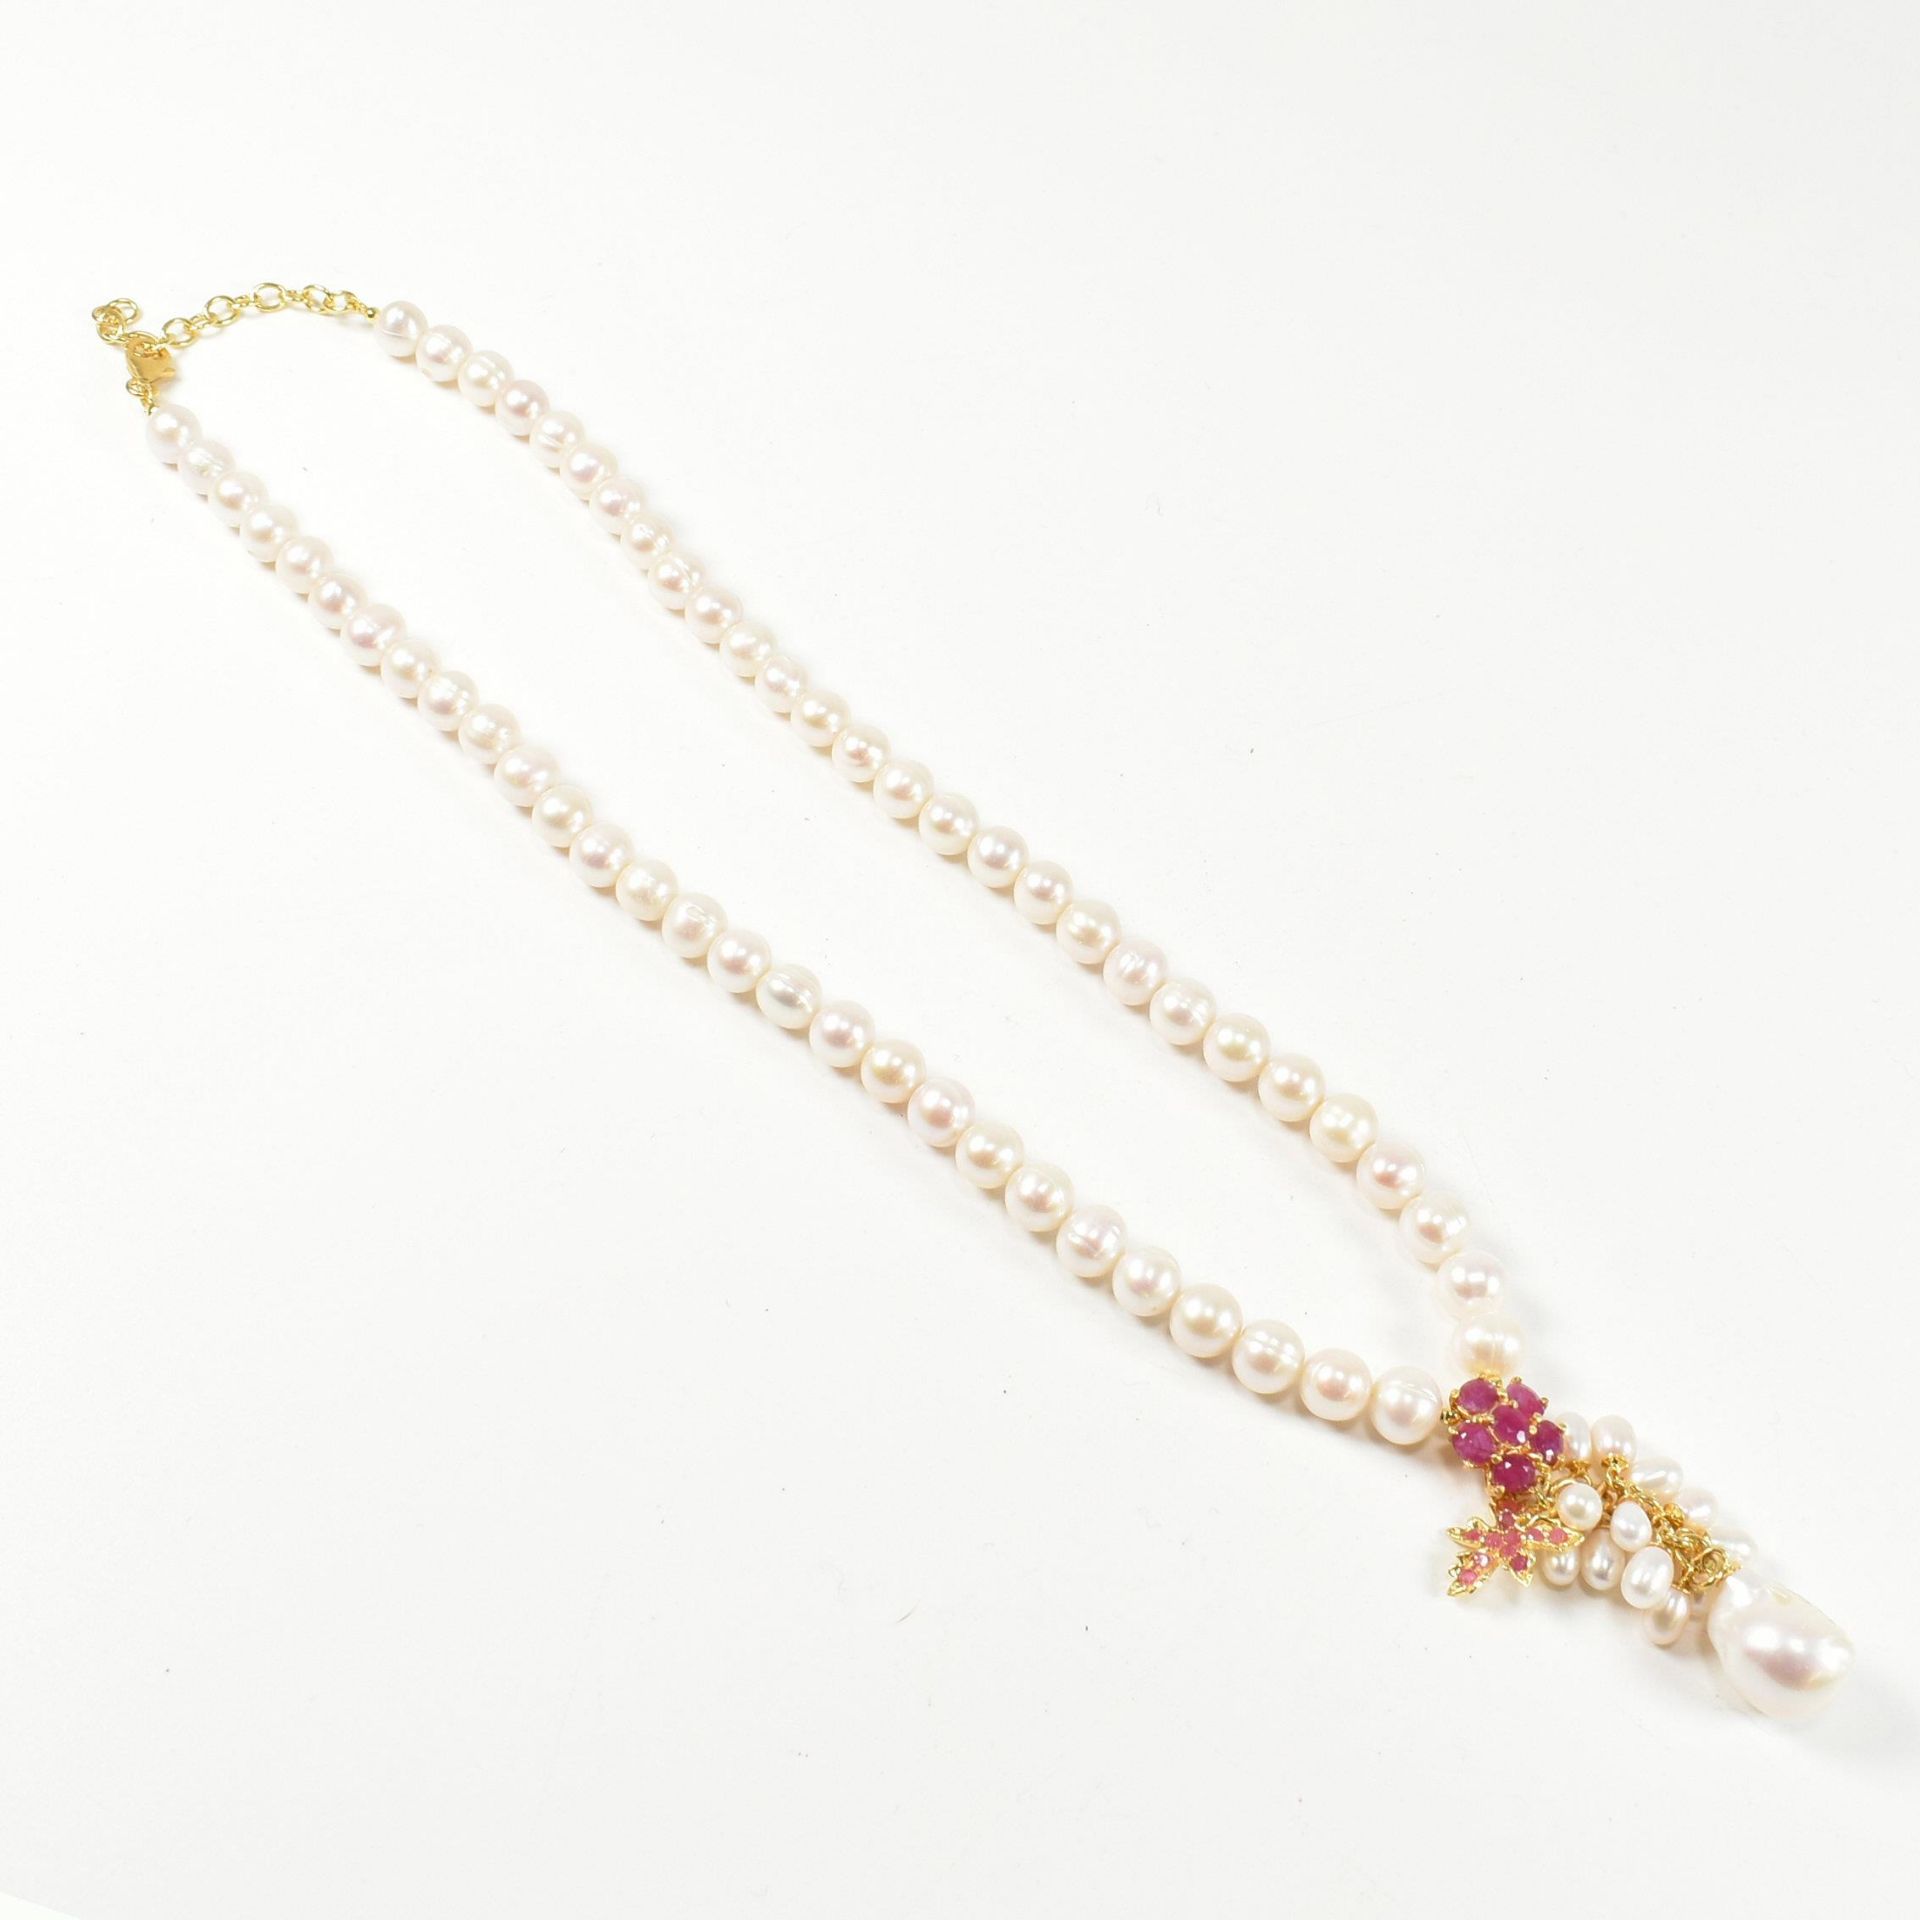 FRESHWATER PEARL & RUBY DROP PENDANT NECKLACE - Image 2 of 7